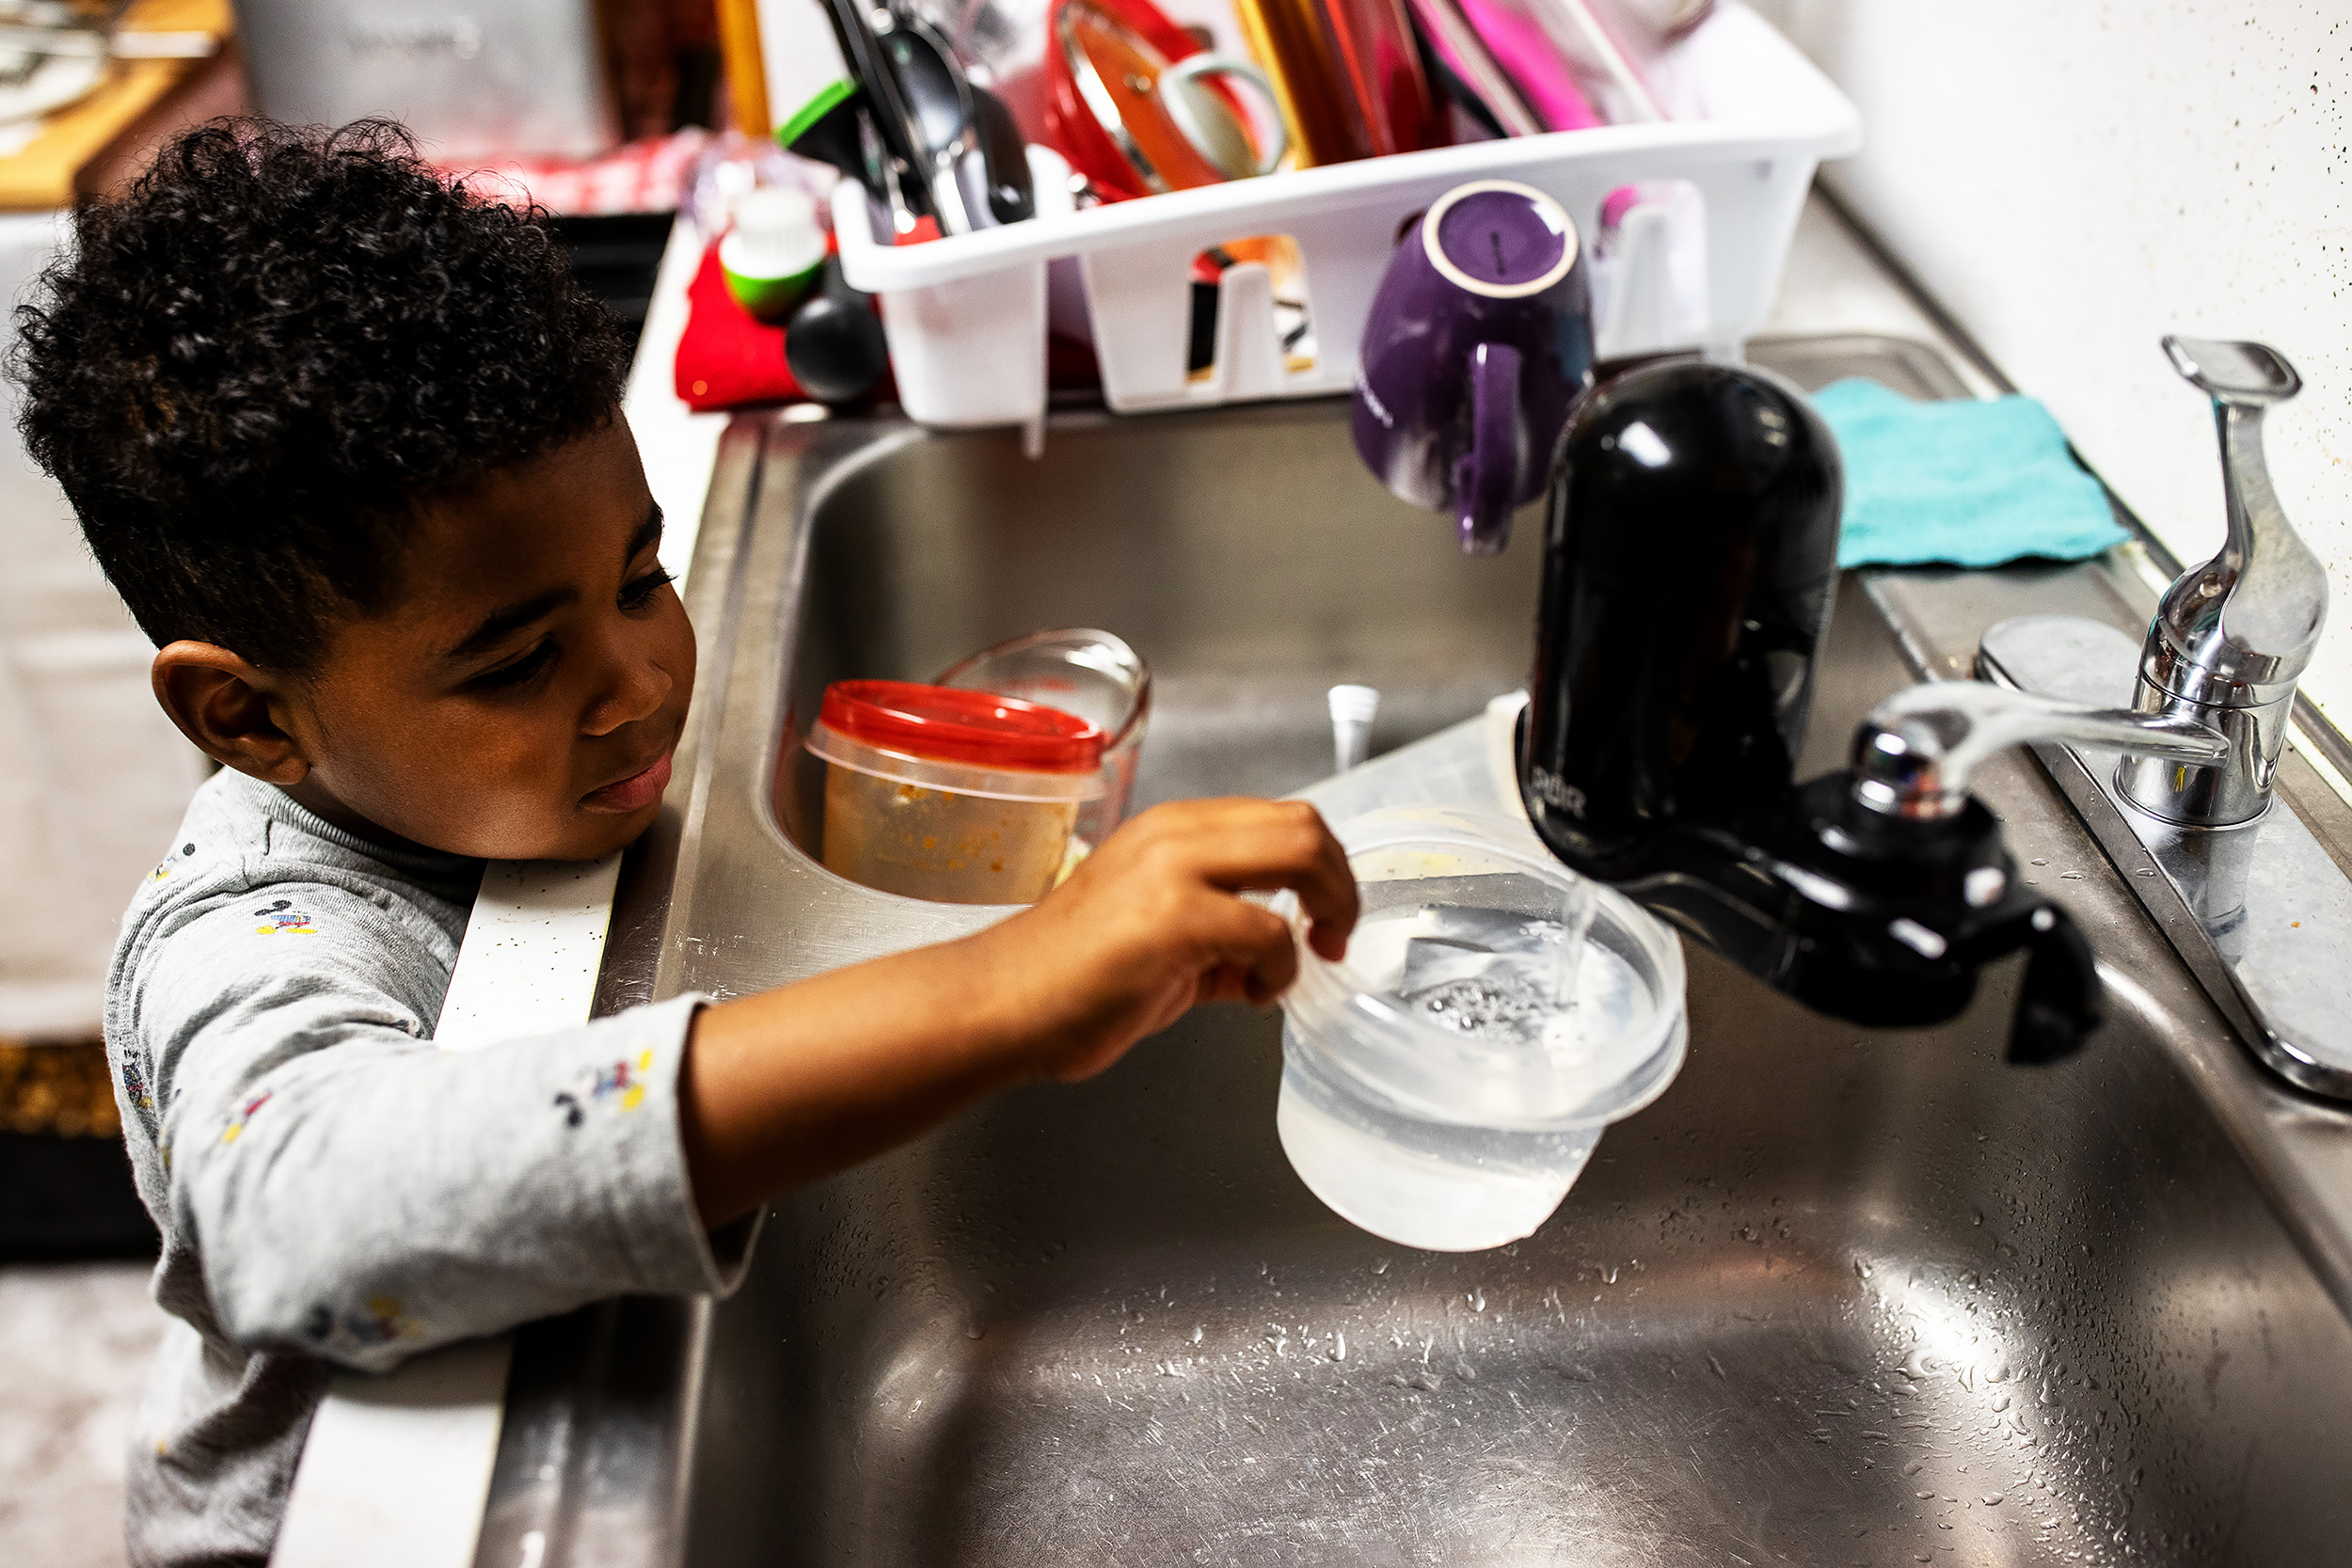  Thomas’s son, Bryce, uses the water filter in the family kitchen. Lead levels in the water of their home measured a staggering 76.2 parts per billion in February 2019. 